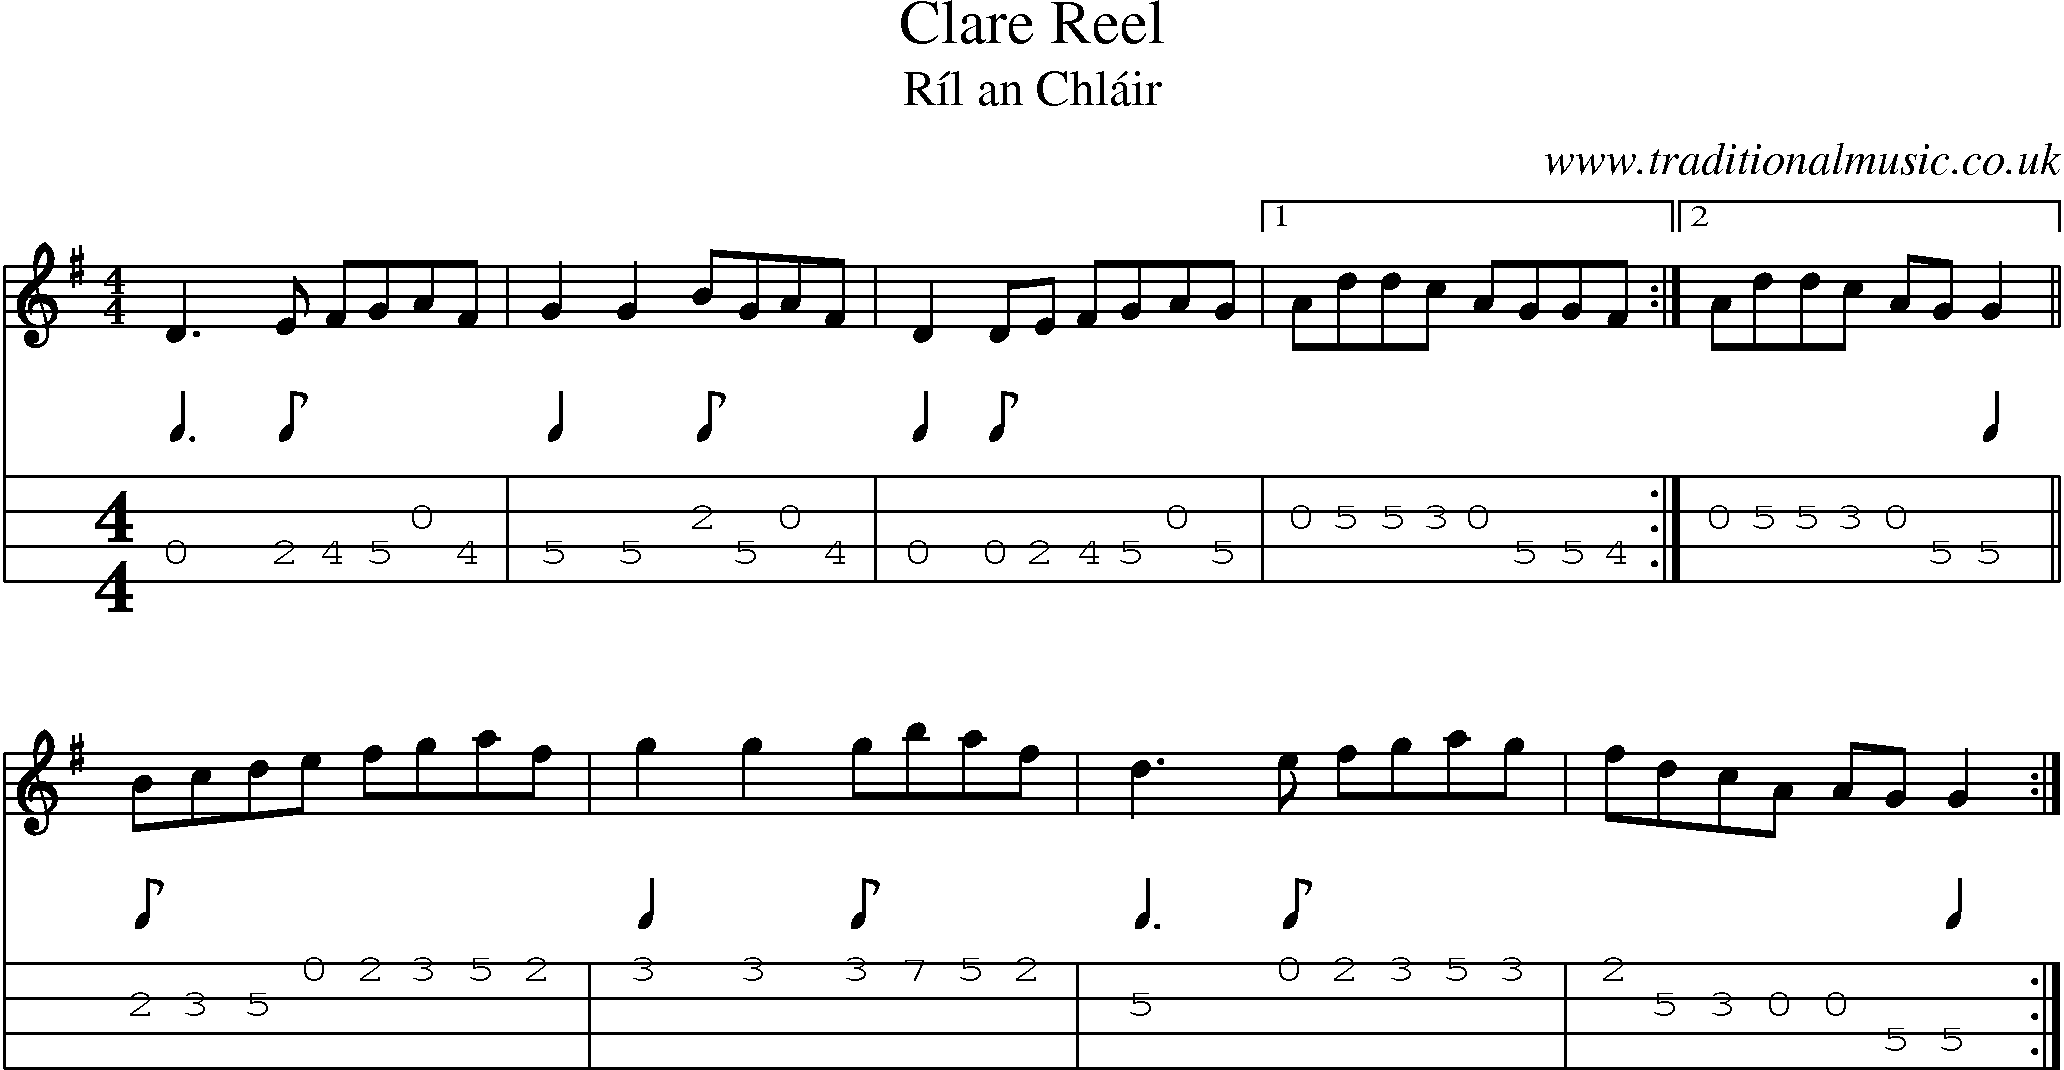 Music Score and Mandolin Tabs for Clare Reel